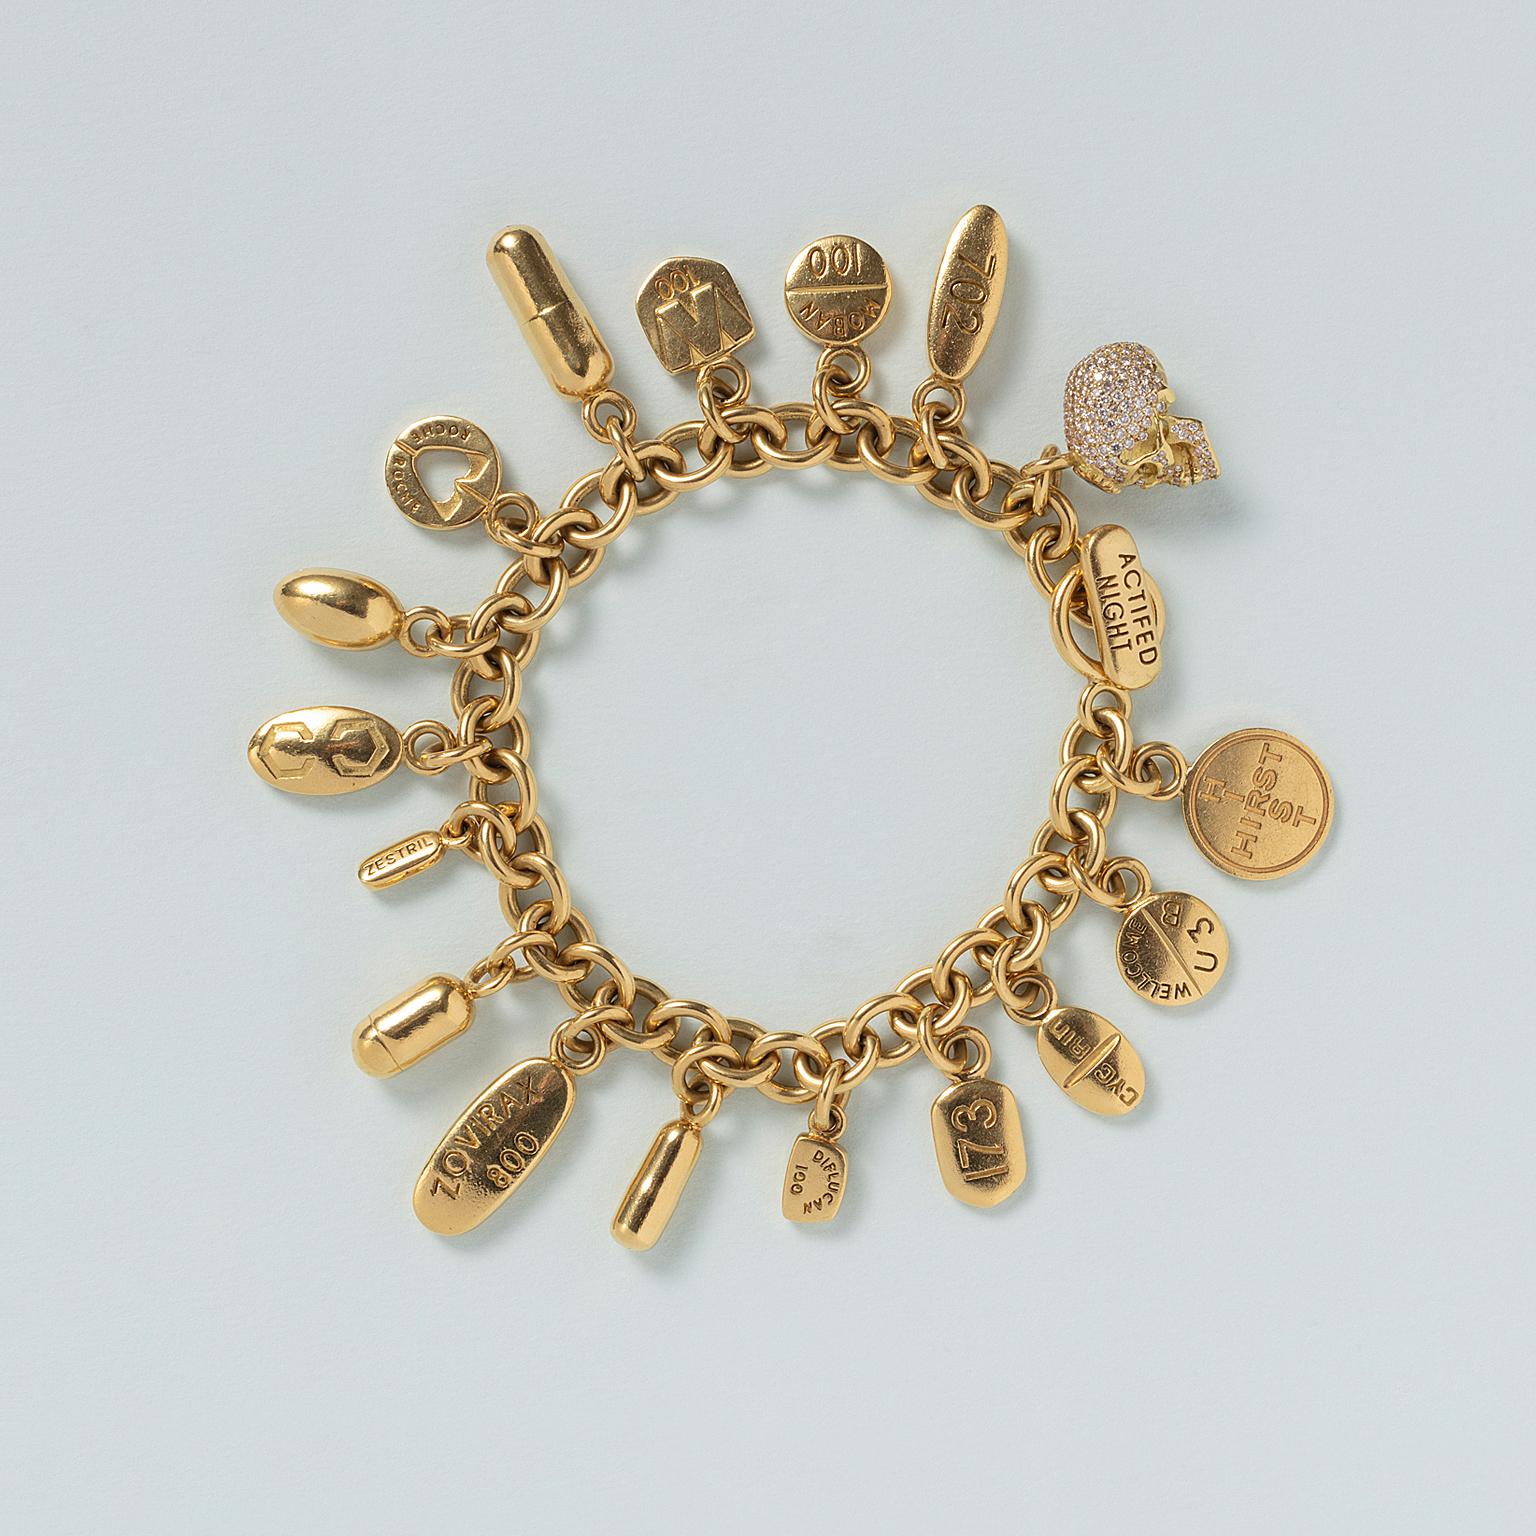 An 18 carat gold charm bracelet with 17 gold pills and one skull pavé set with diamonds, signed and numbered: Damien Hirst, 8/50, with English assay marks on one of the charms, London, 2013, with original case.

This bracelet was inspired by Hirst’s